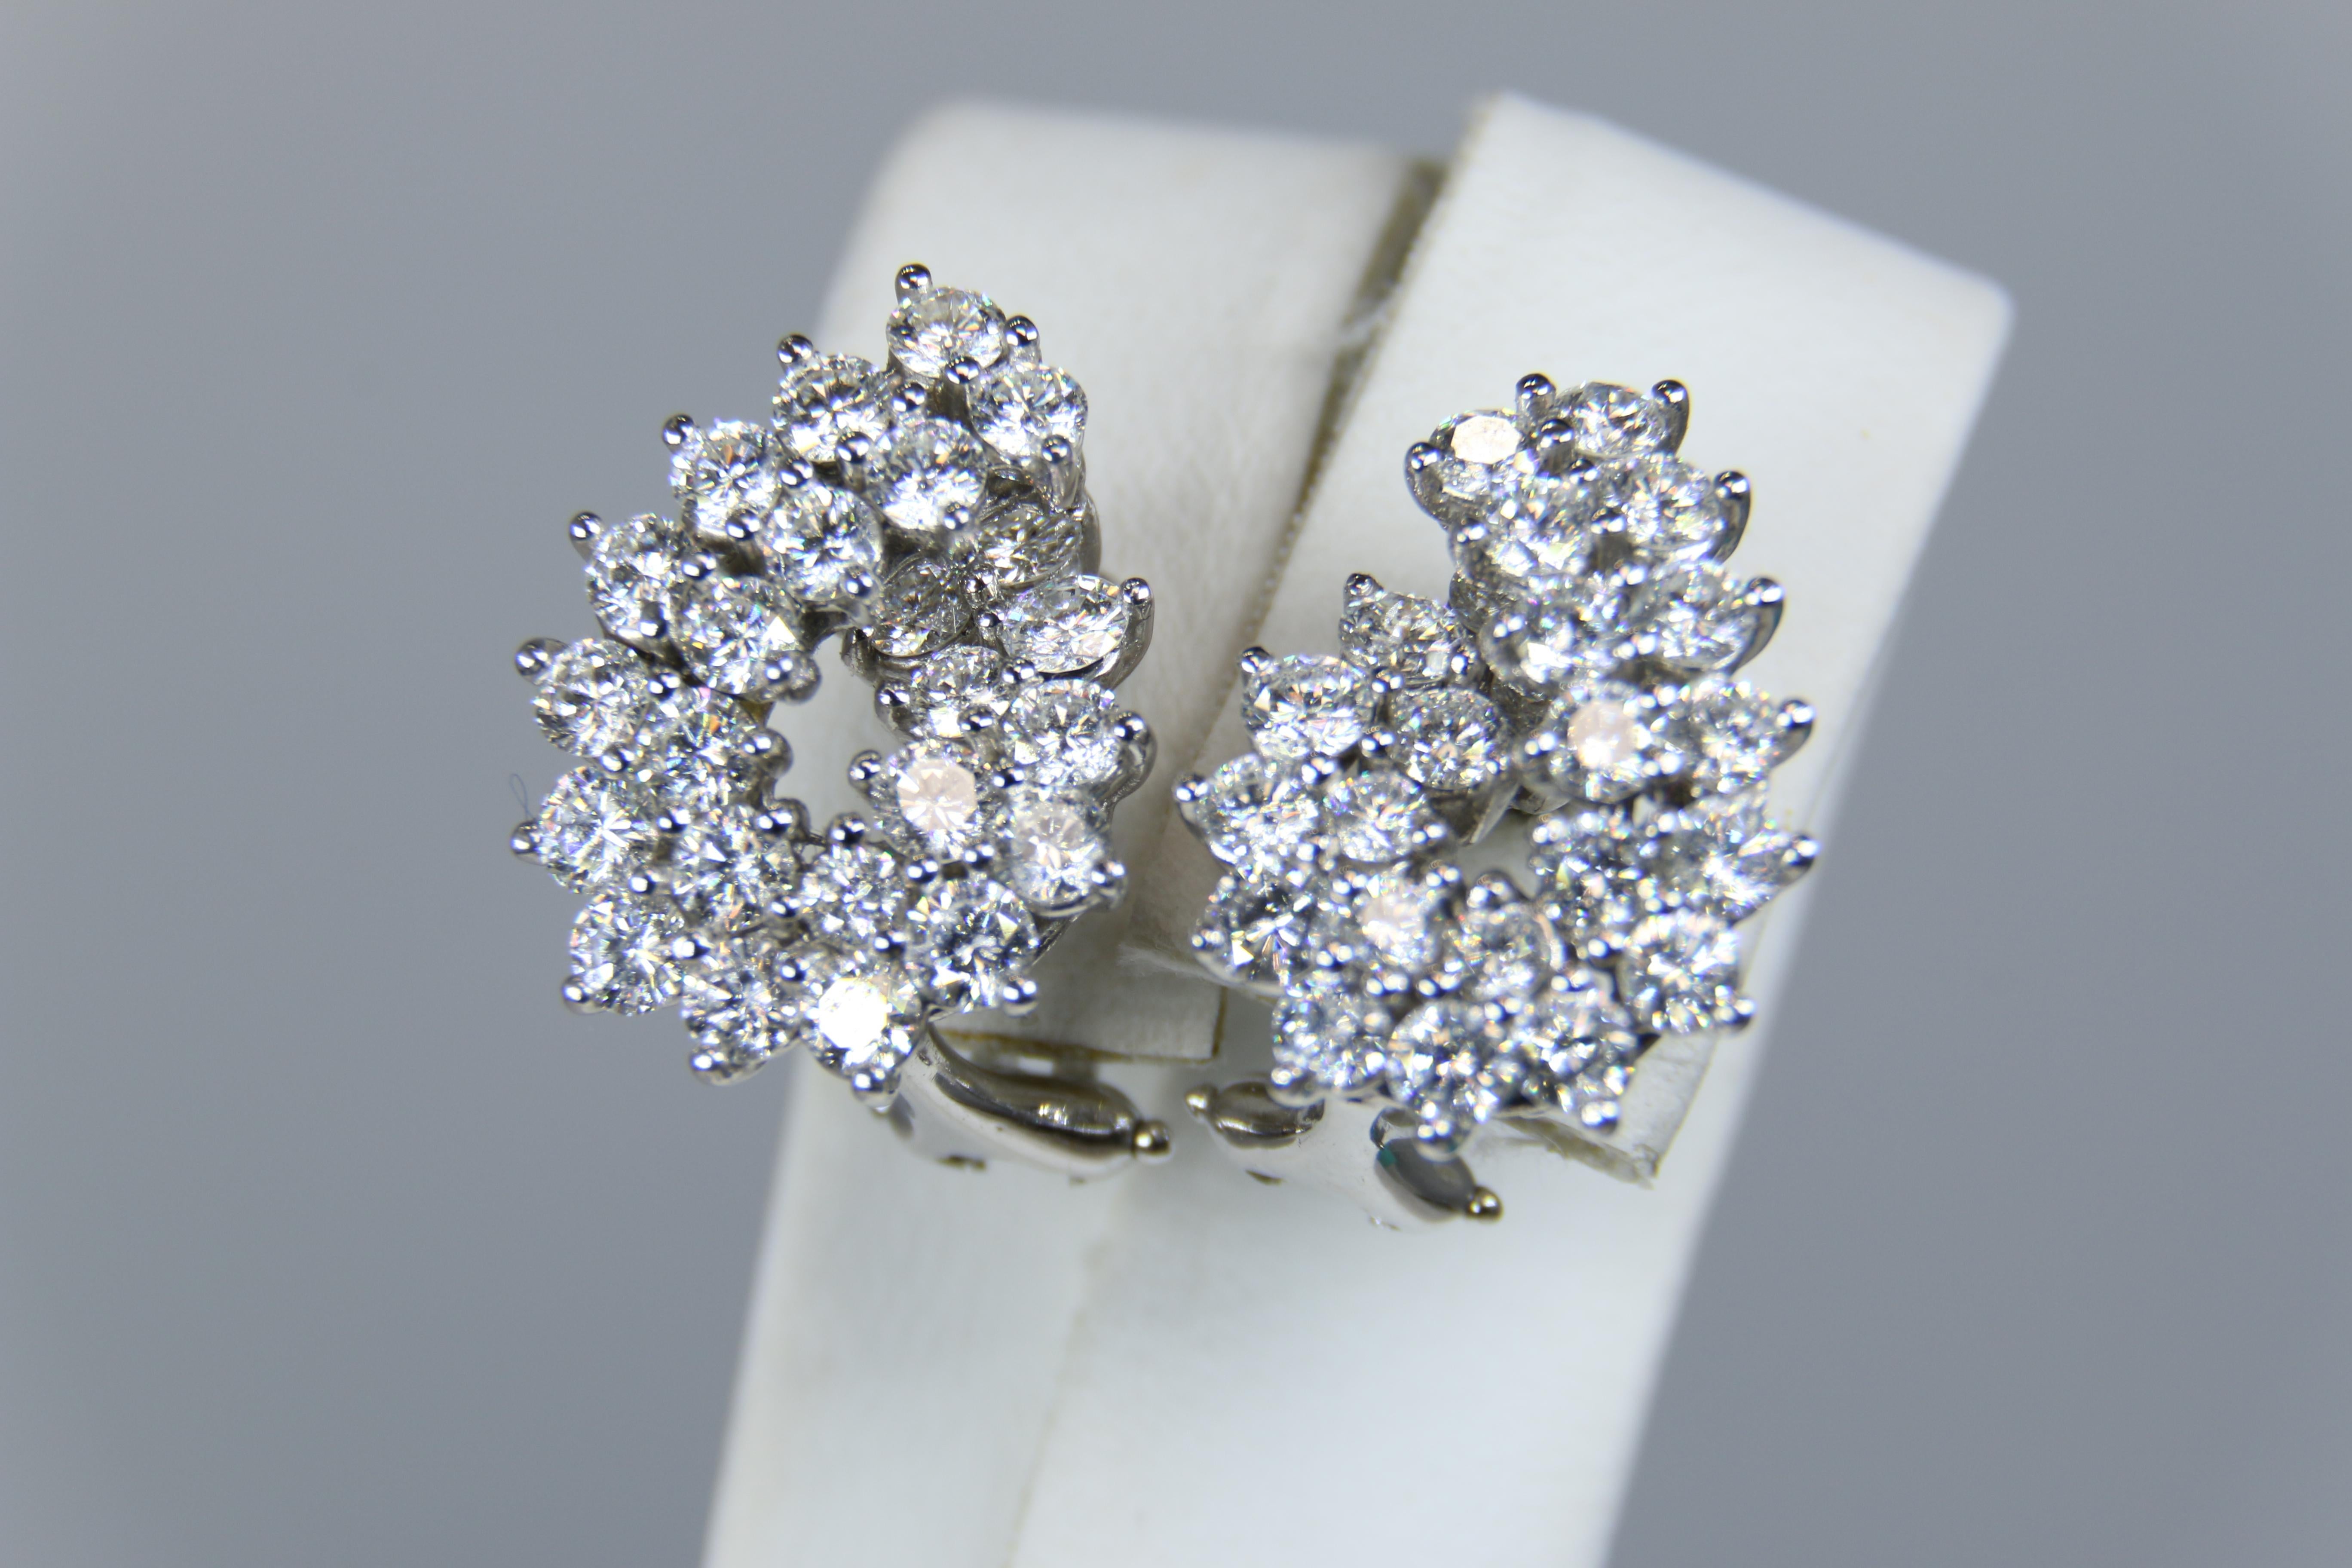 Tiffany & Co Platinum Diamond Earrings have a double row swirl pattern prong set with a total of 4.16 carats of bright round brilliant cut diamonds. Earrings feature an Omega style clip on each with pad area for security. These clip style are easily